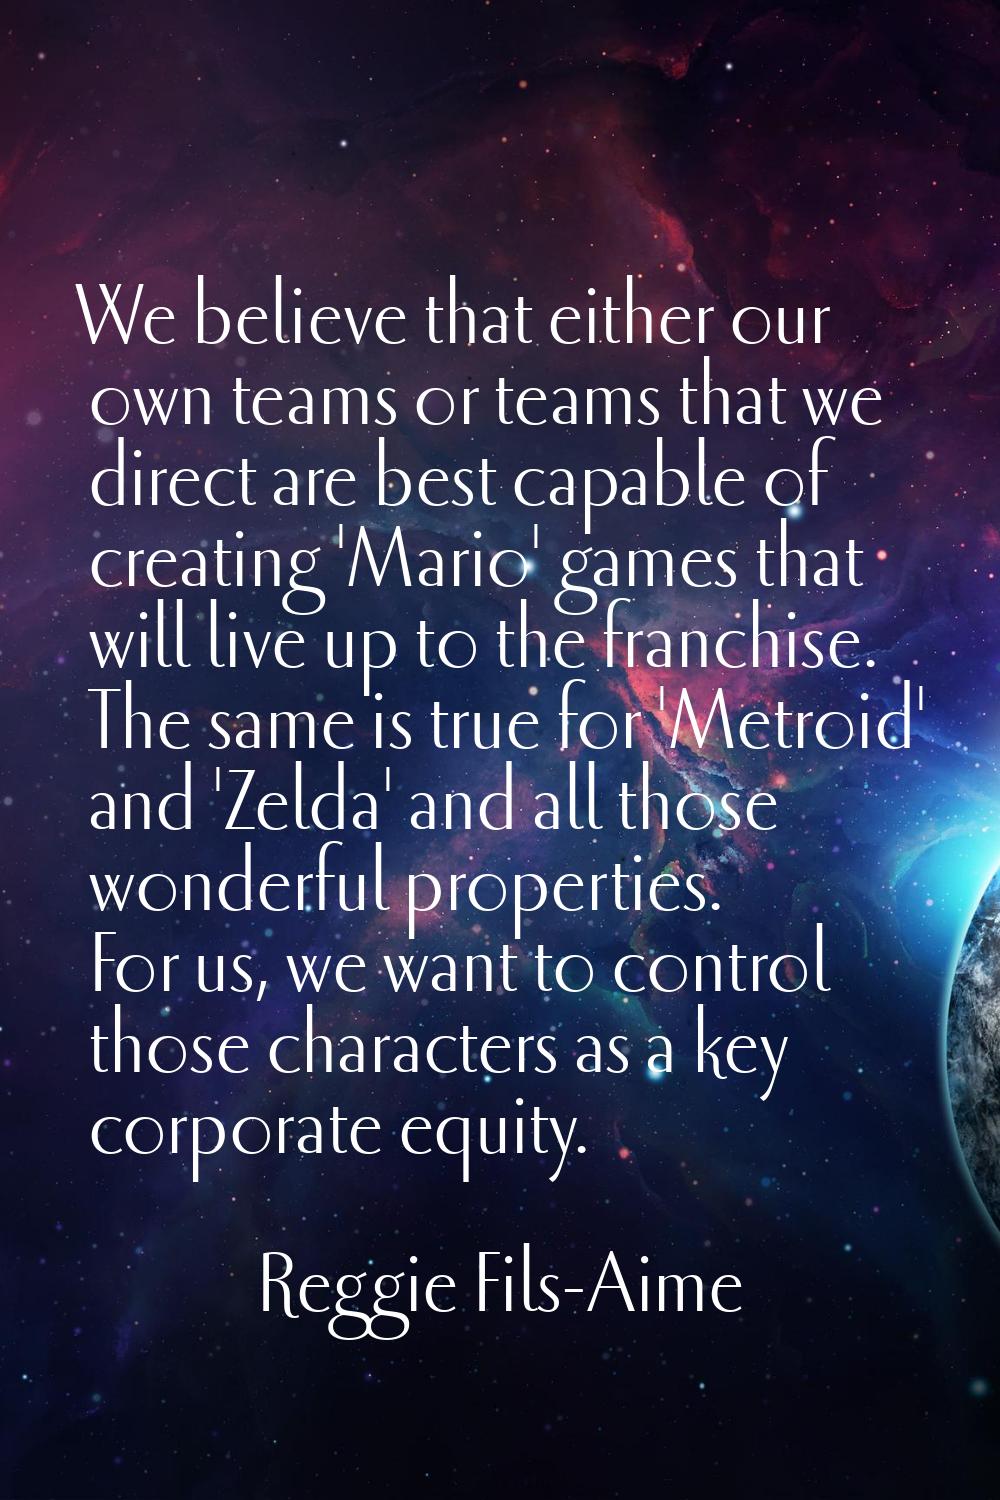 We believe that either our own teams or teams that we direct are best capable of creating 'Mario' g